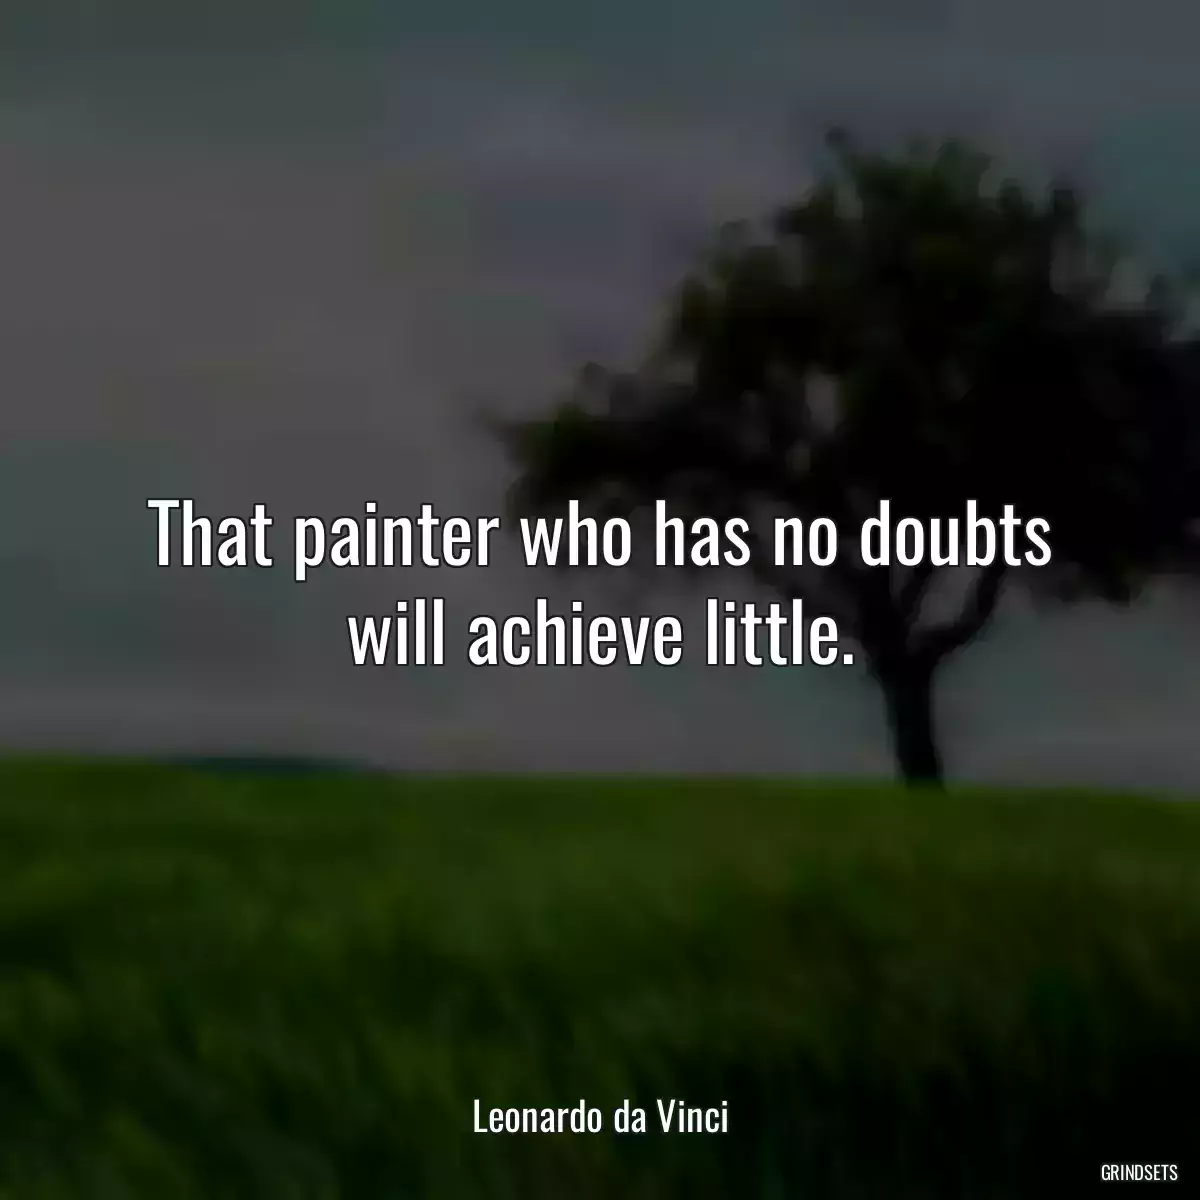 That painter who has no doubts will achieve little.